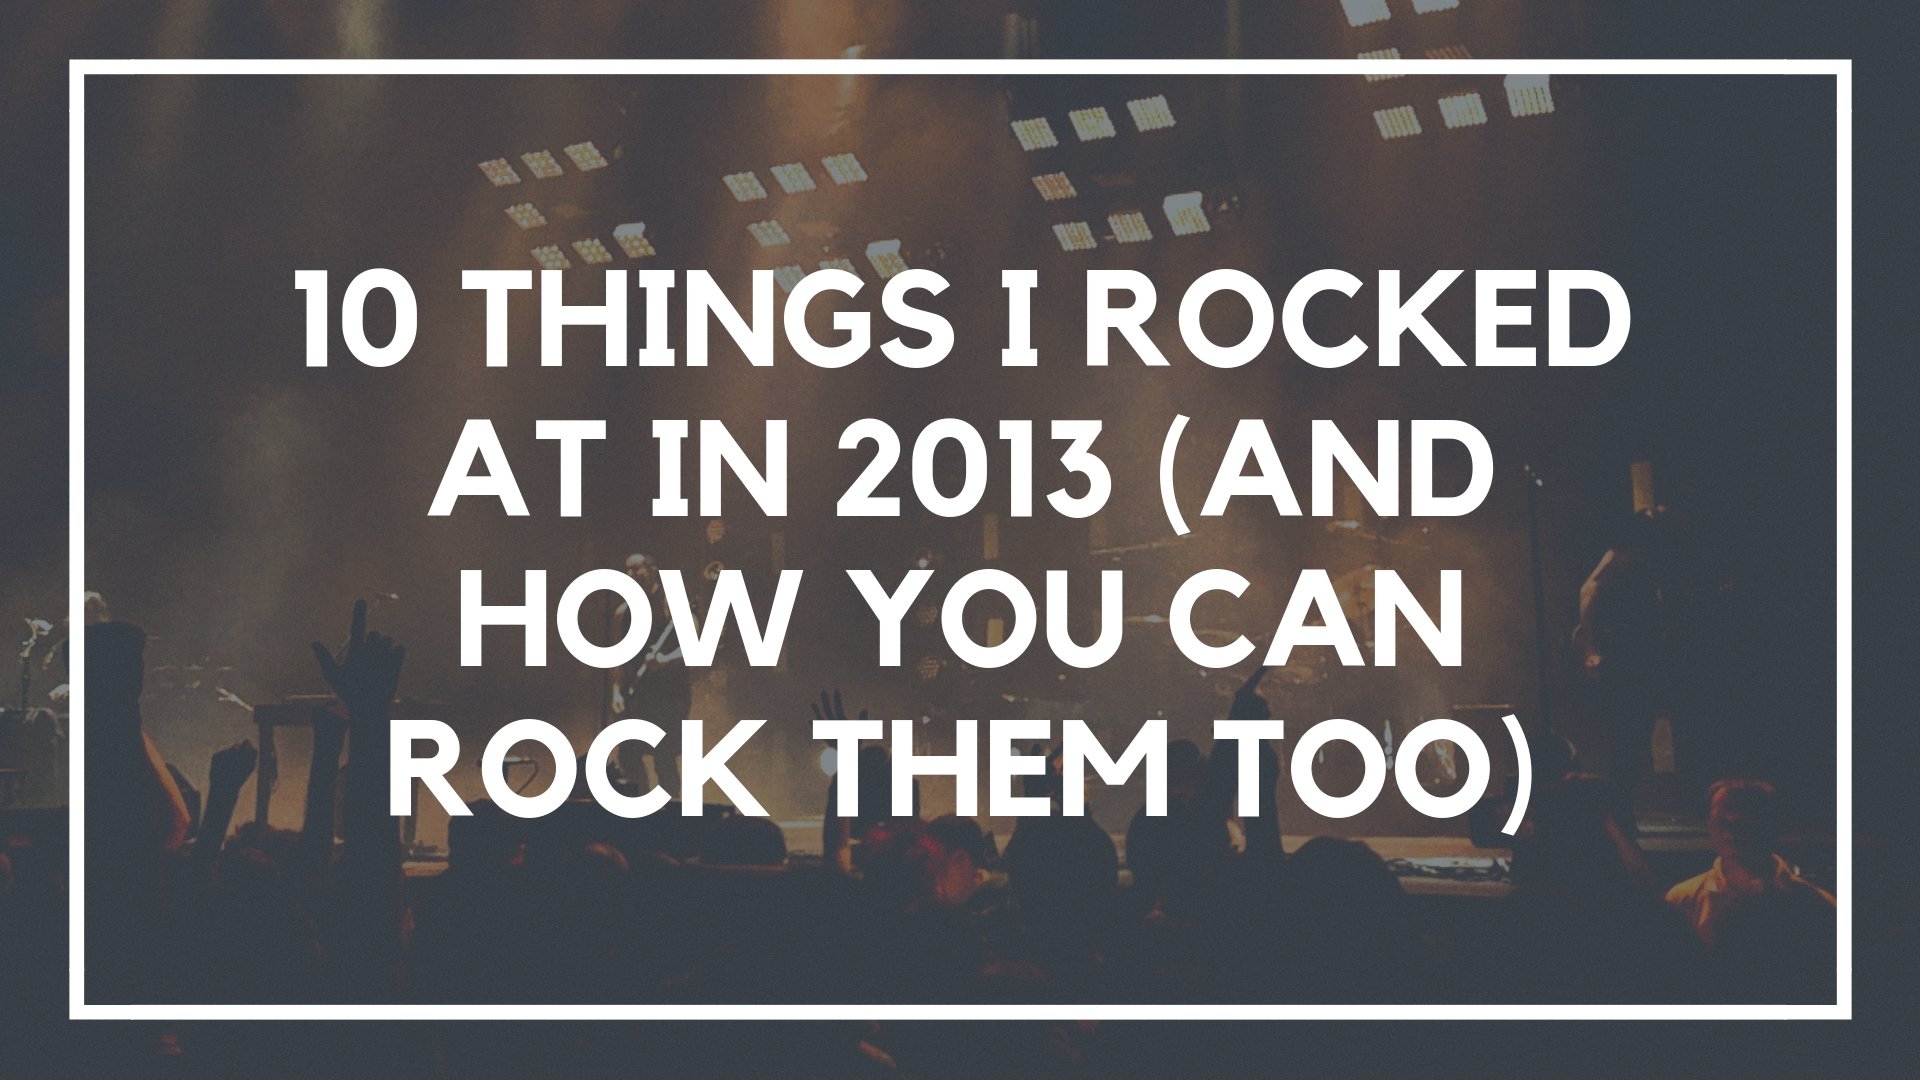 10 Things I Rocked at in 2013 (And How You Can Rock Them Too)